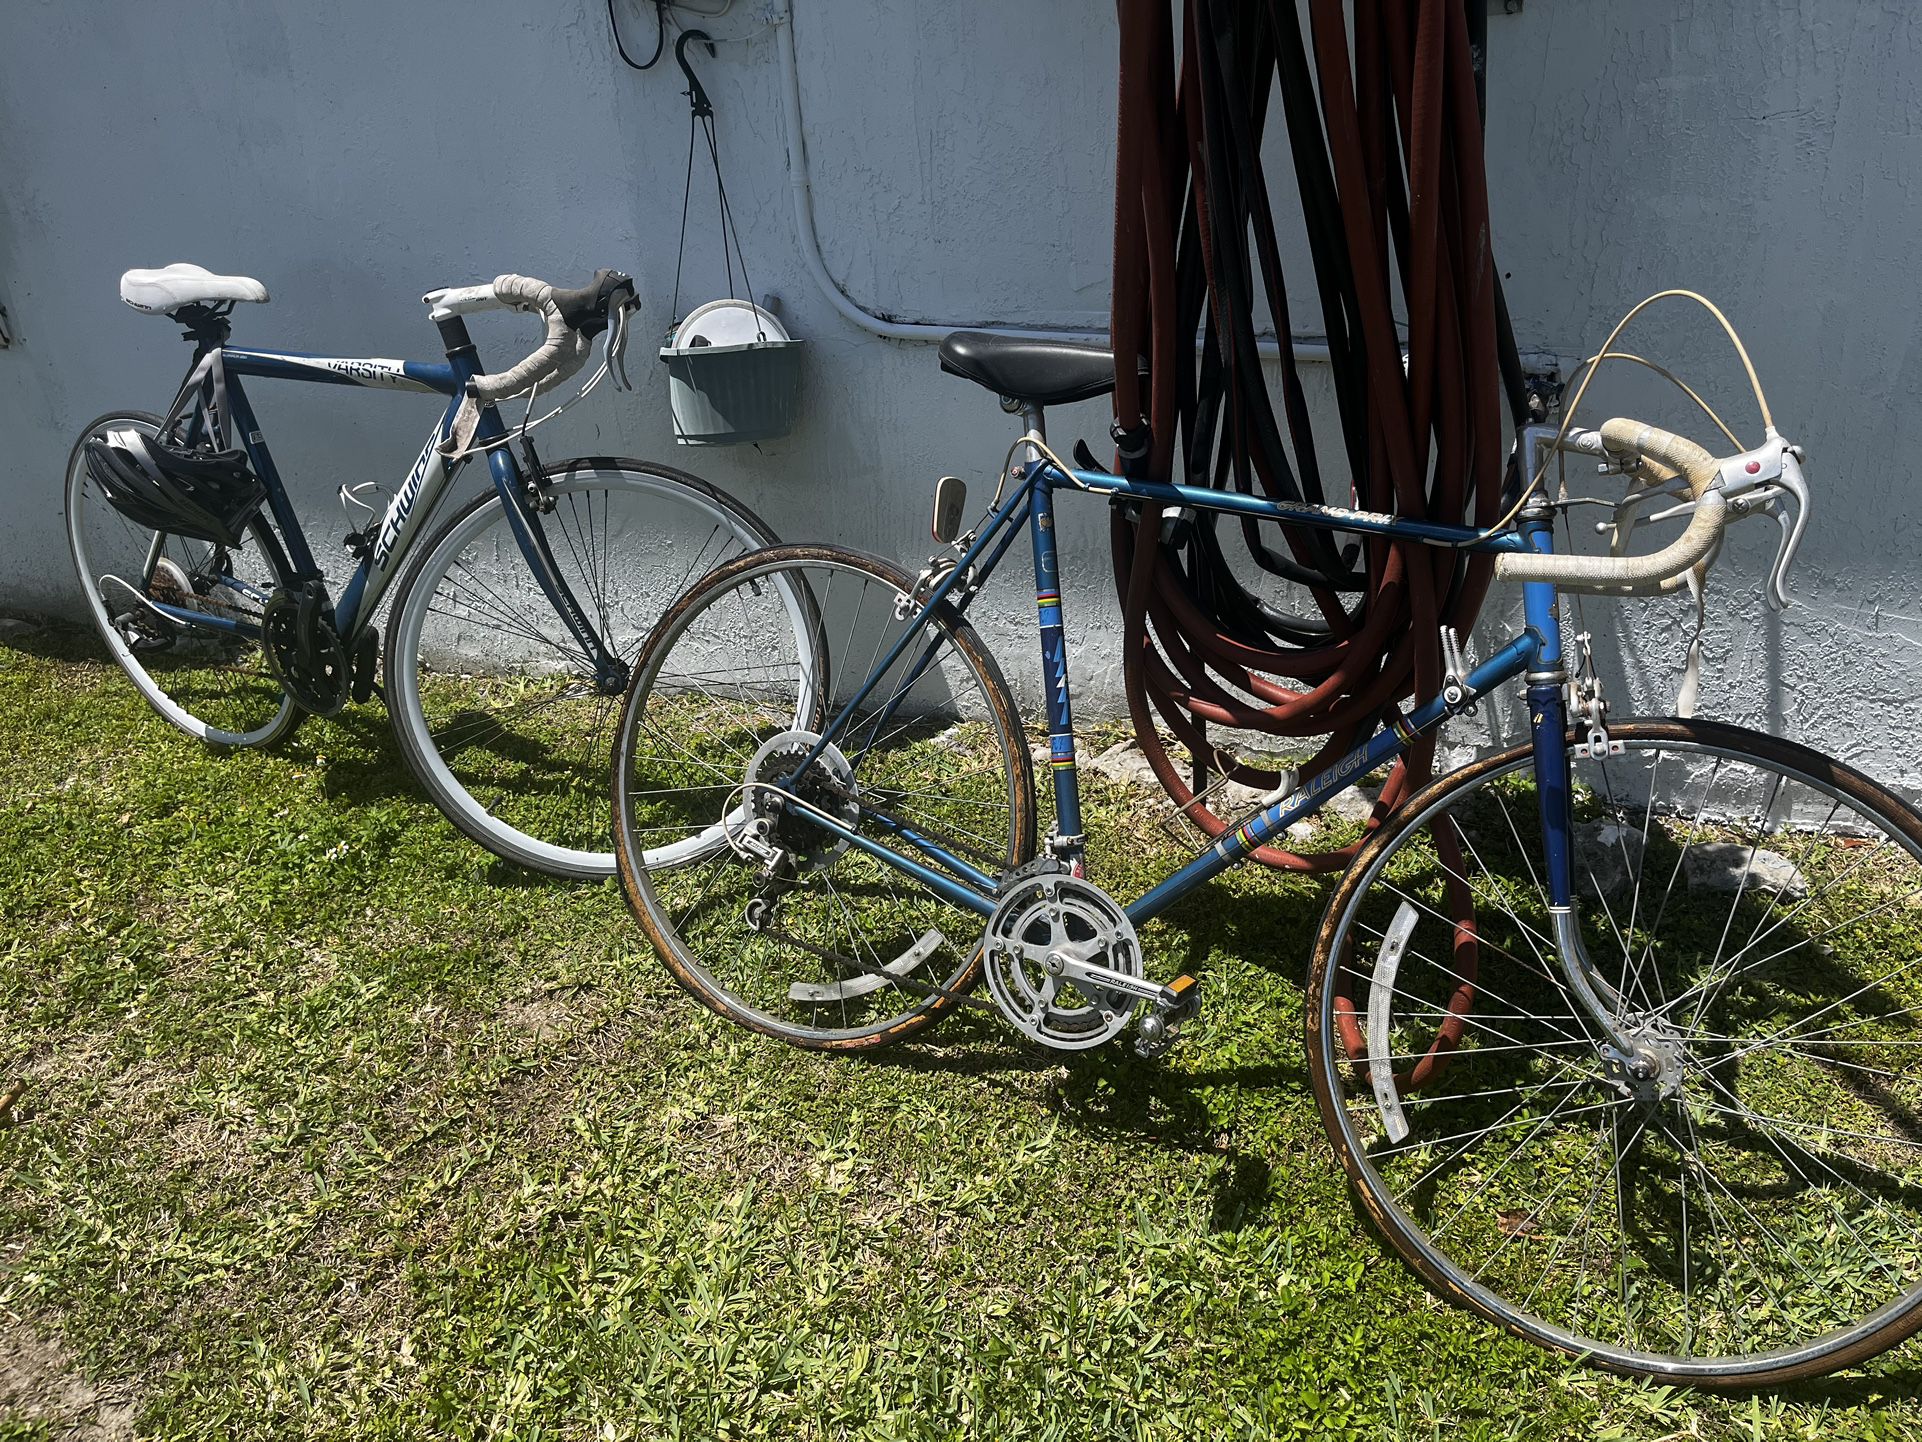 Bikes 2 Of Them One Grand Prix Raleigh Vintage 